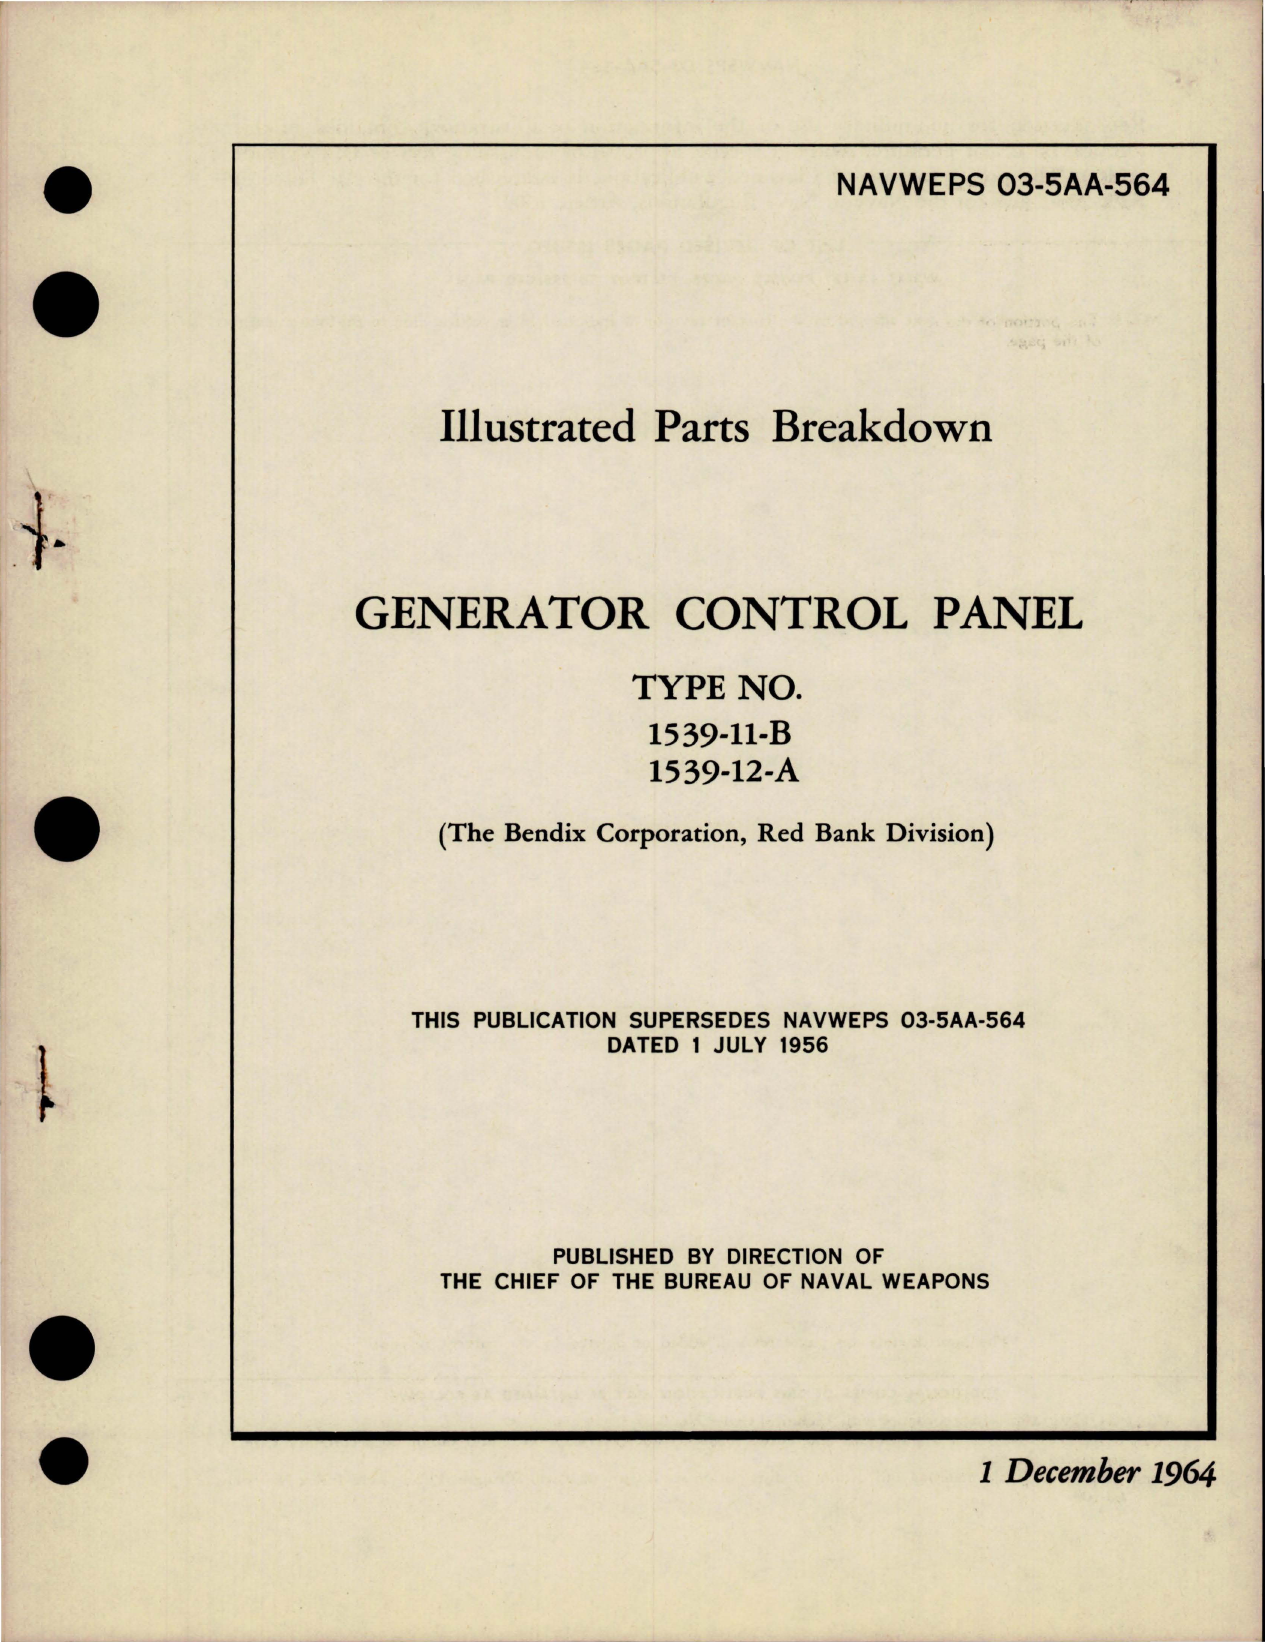 Sample page 1 from AirCorps Library document: Illustrated Parts Breakdown for Generator Control Panel - Types 1539-11-B and 1539-12-A 